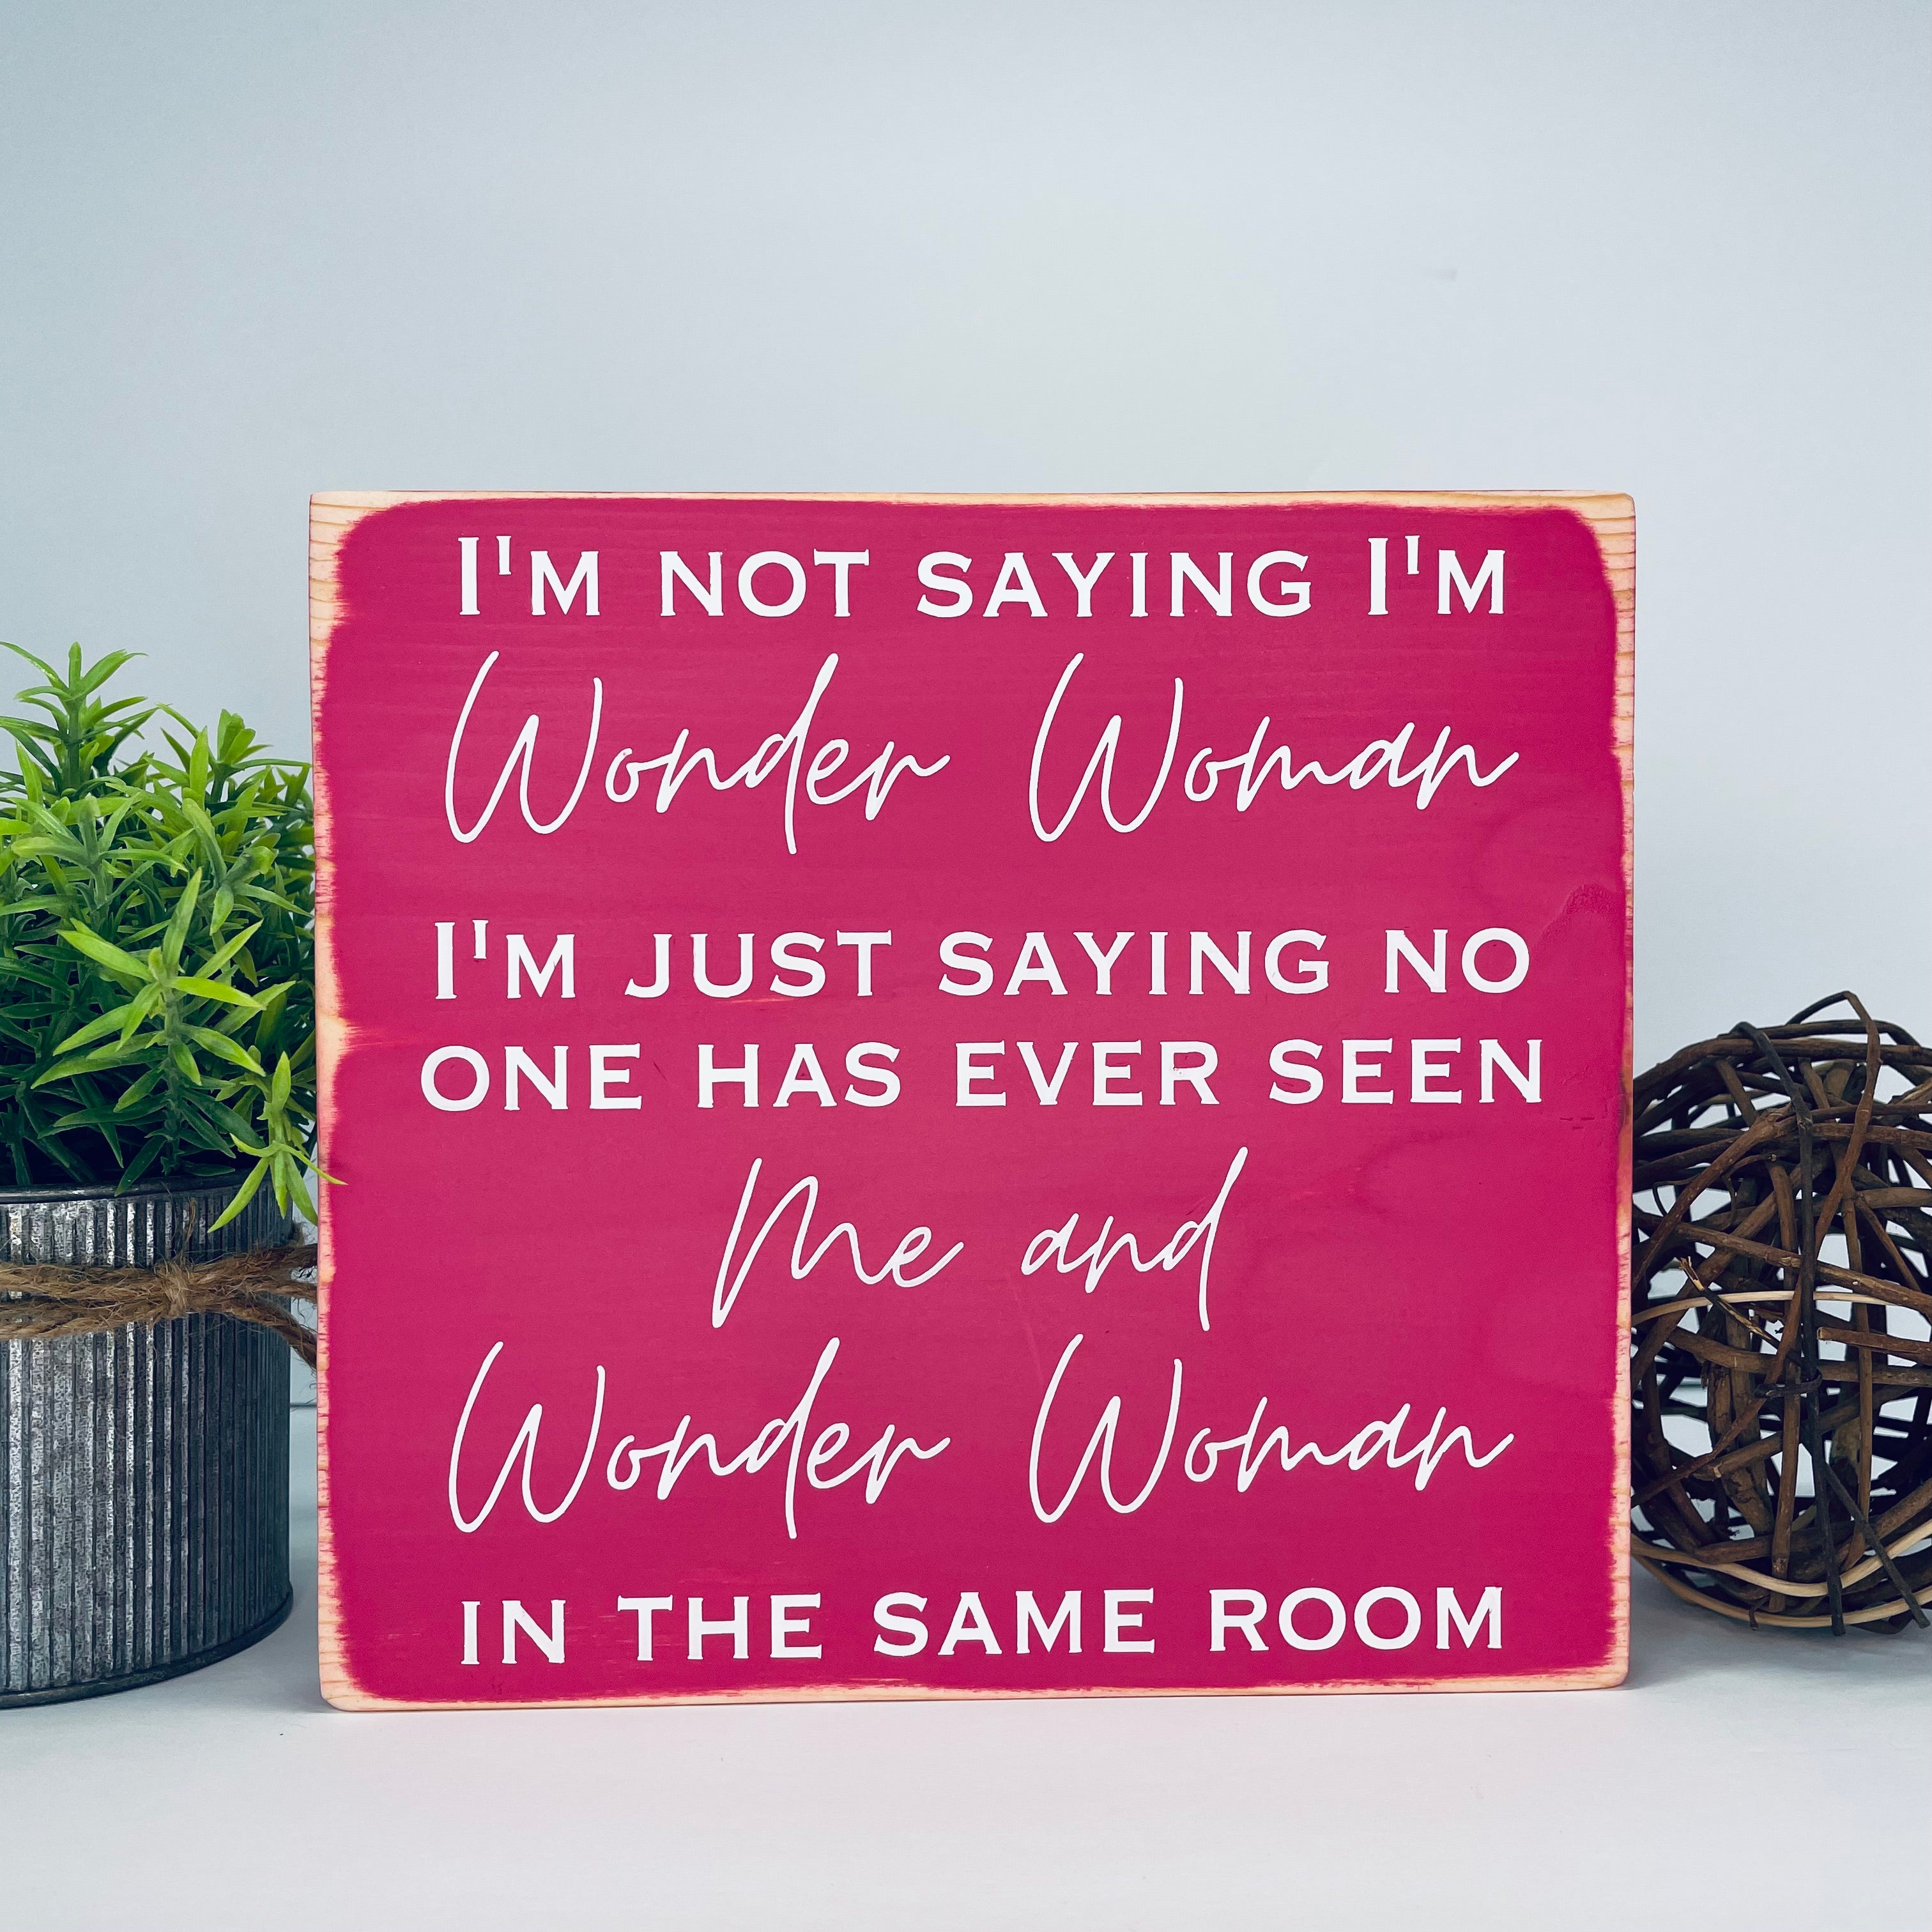 medium sized square wood sign painted pink with white lettering that reads, " I'm not saying I'm Wonder Woman, I'm just saying no one has ever seen me and Wonder Woman in the same room". All text is in all caps except for "Wonder Woman" and "Me and Wonder Woman". Text is centered, takes up the entire area and is on 7 lines. Glossy finish.